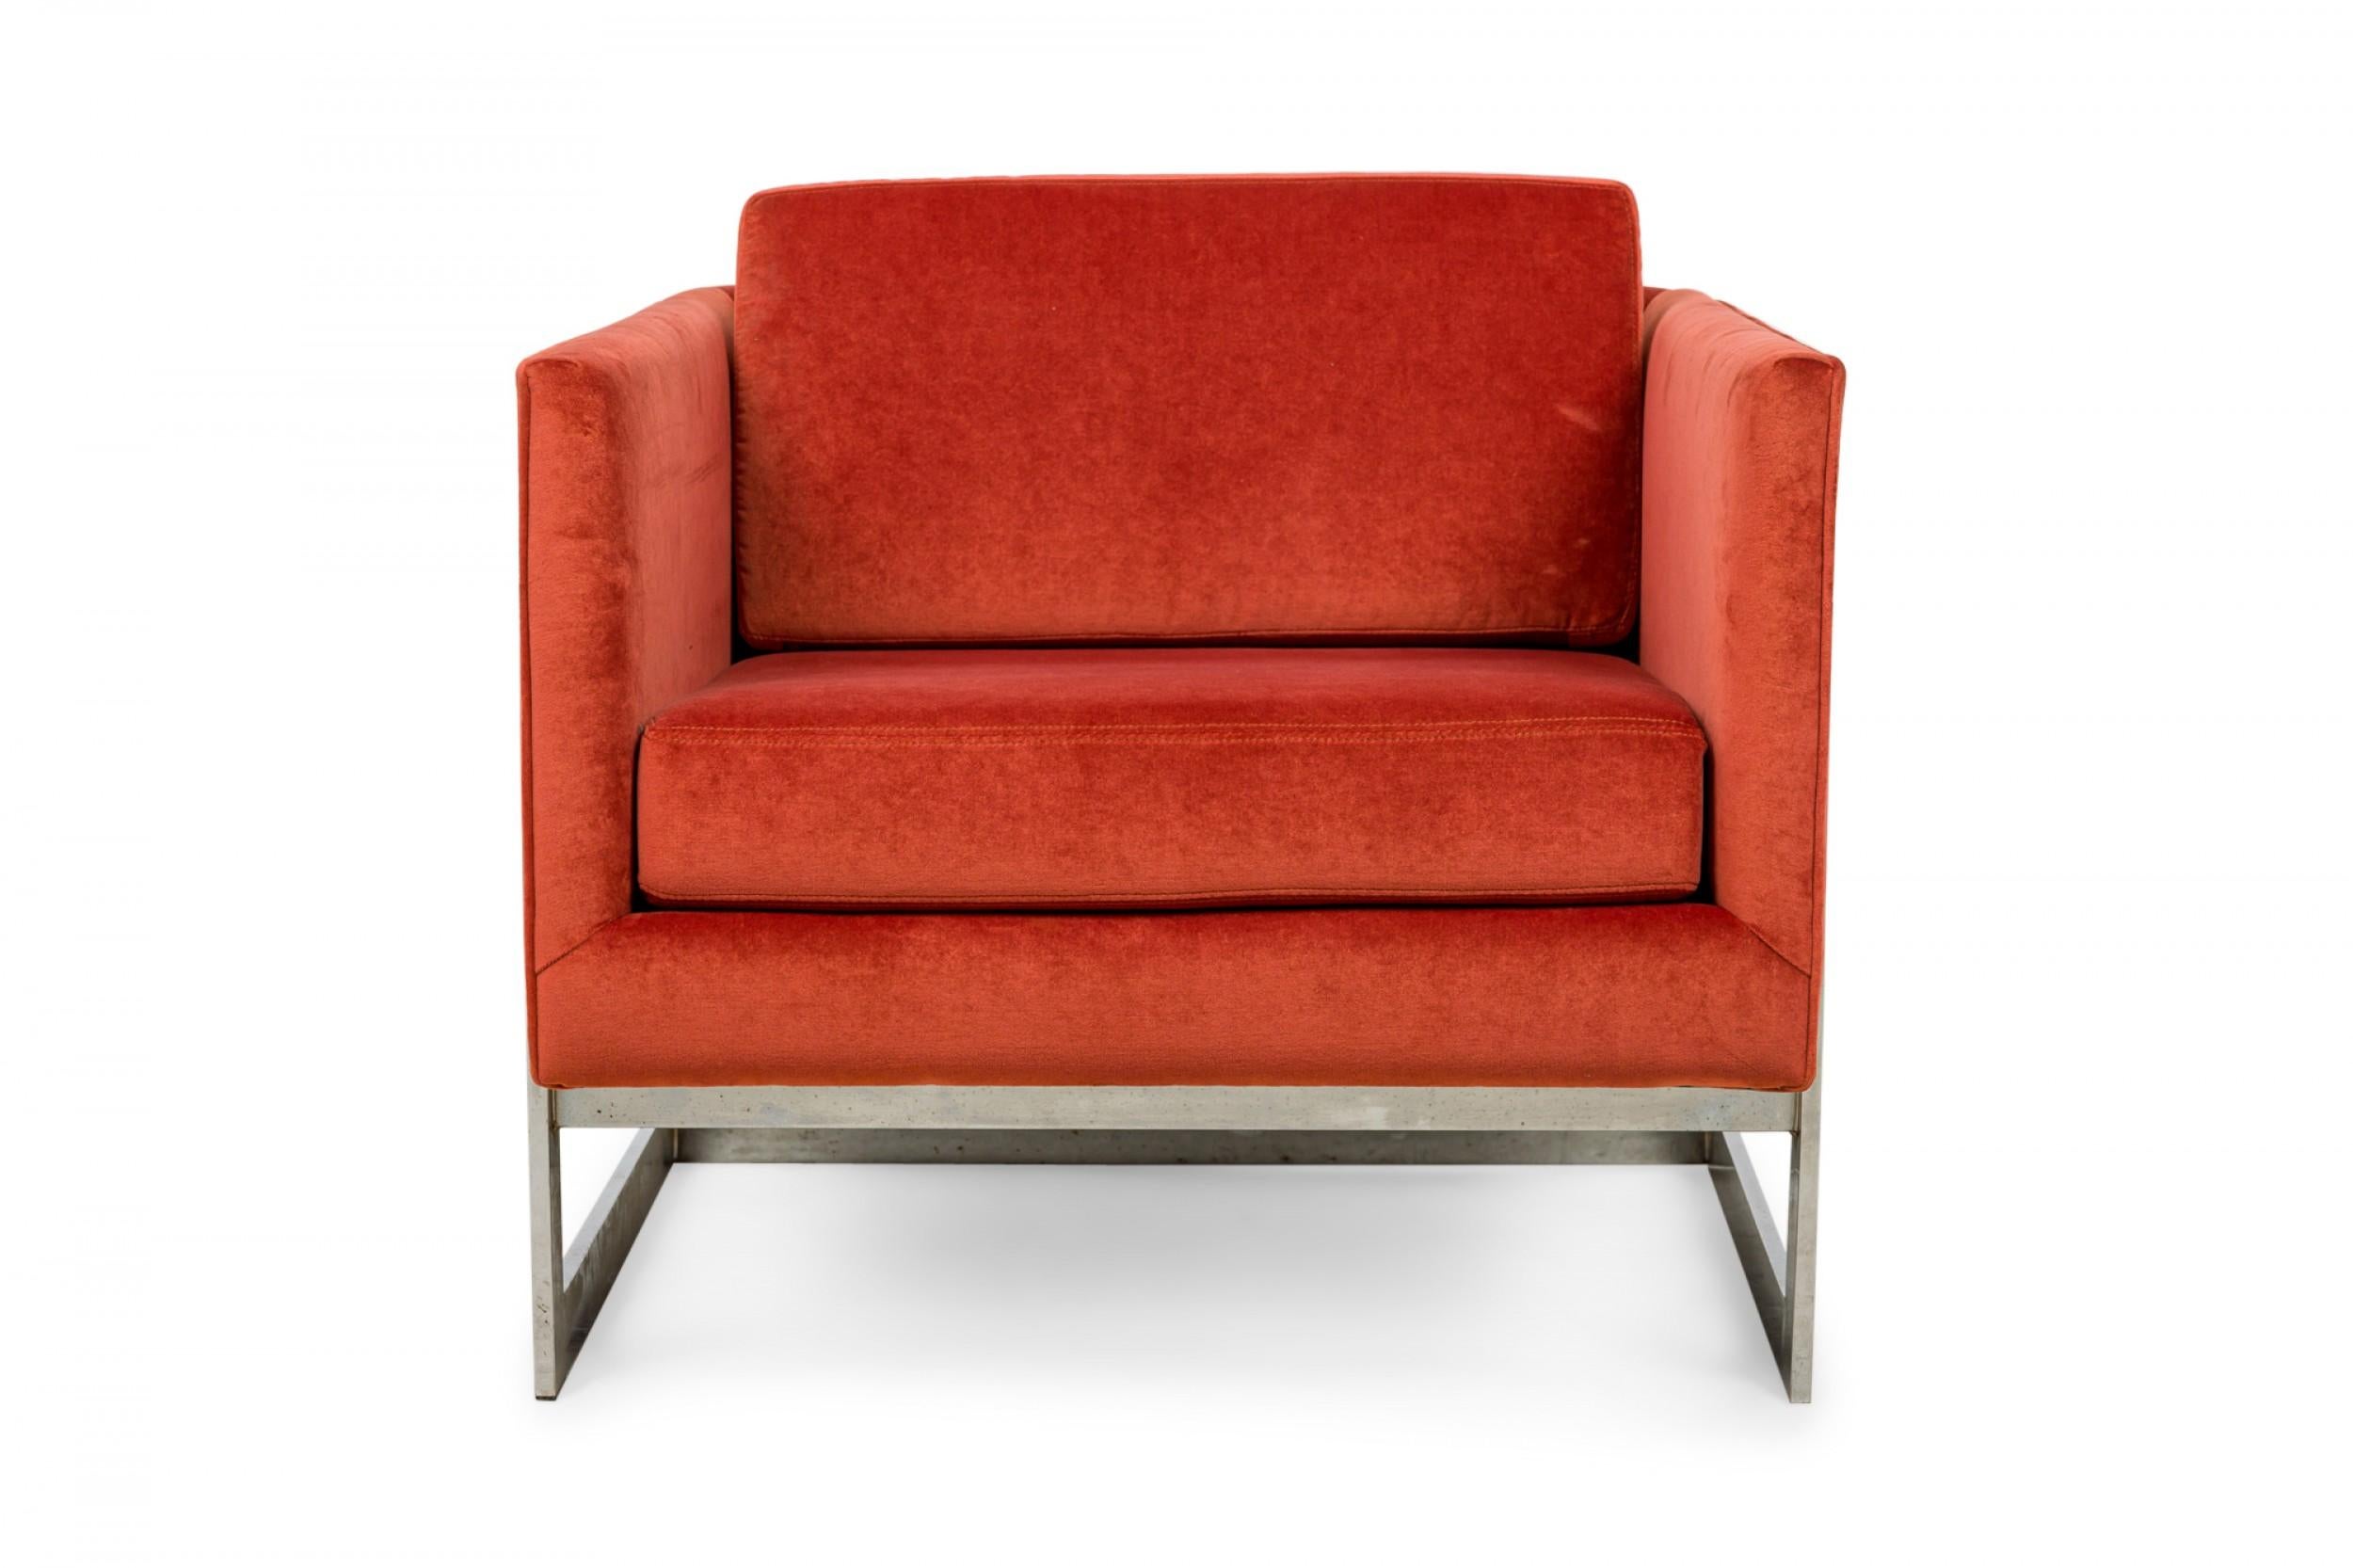 Pair of American mid-century floating cube lounge /armchairs with polished chrome frames and orange velvet upholstery. (MILO BAUGHMAN FOR THAYER COGGIN)(PRICED AS PAIR)